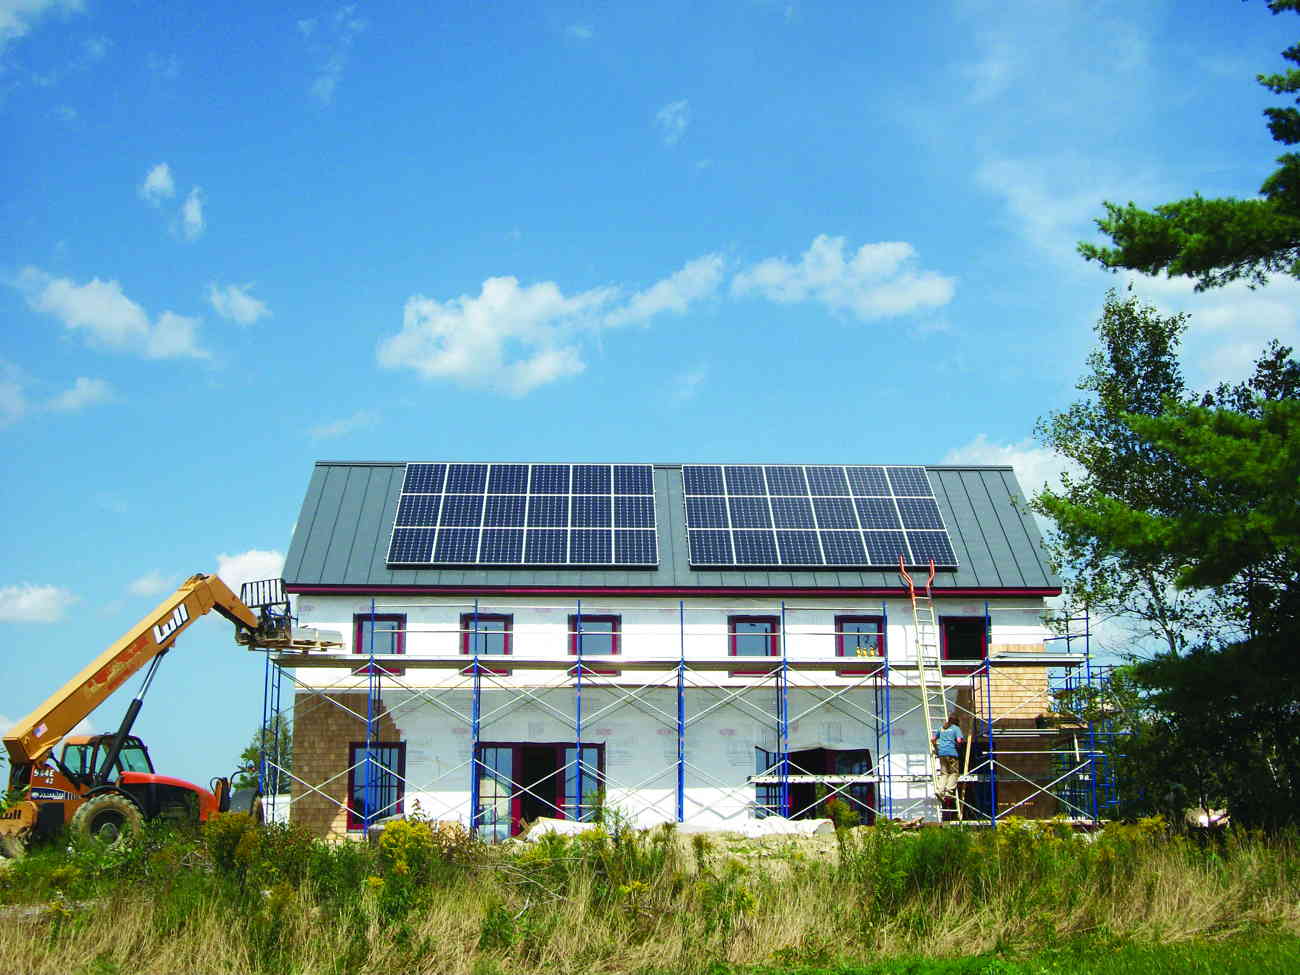 Community of Passive Homes Becomes Reality in Maine